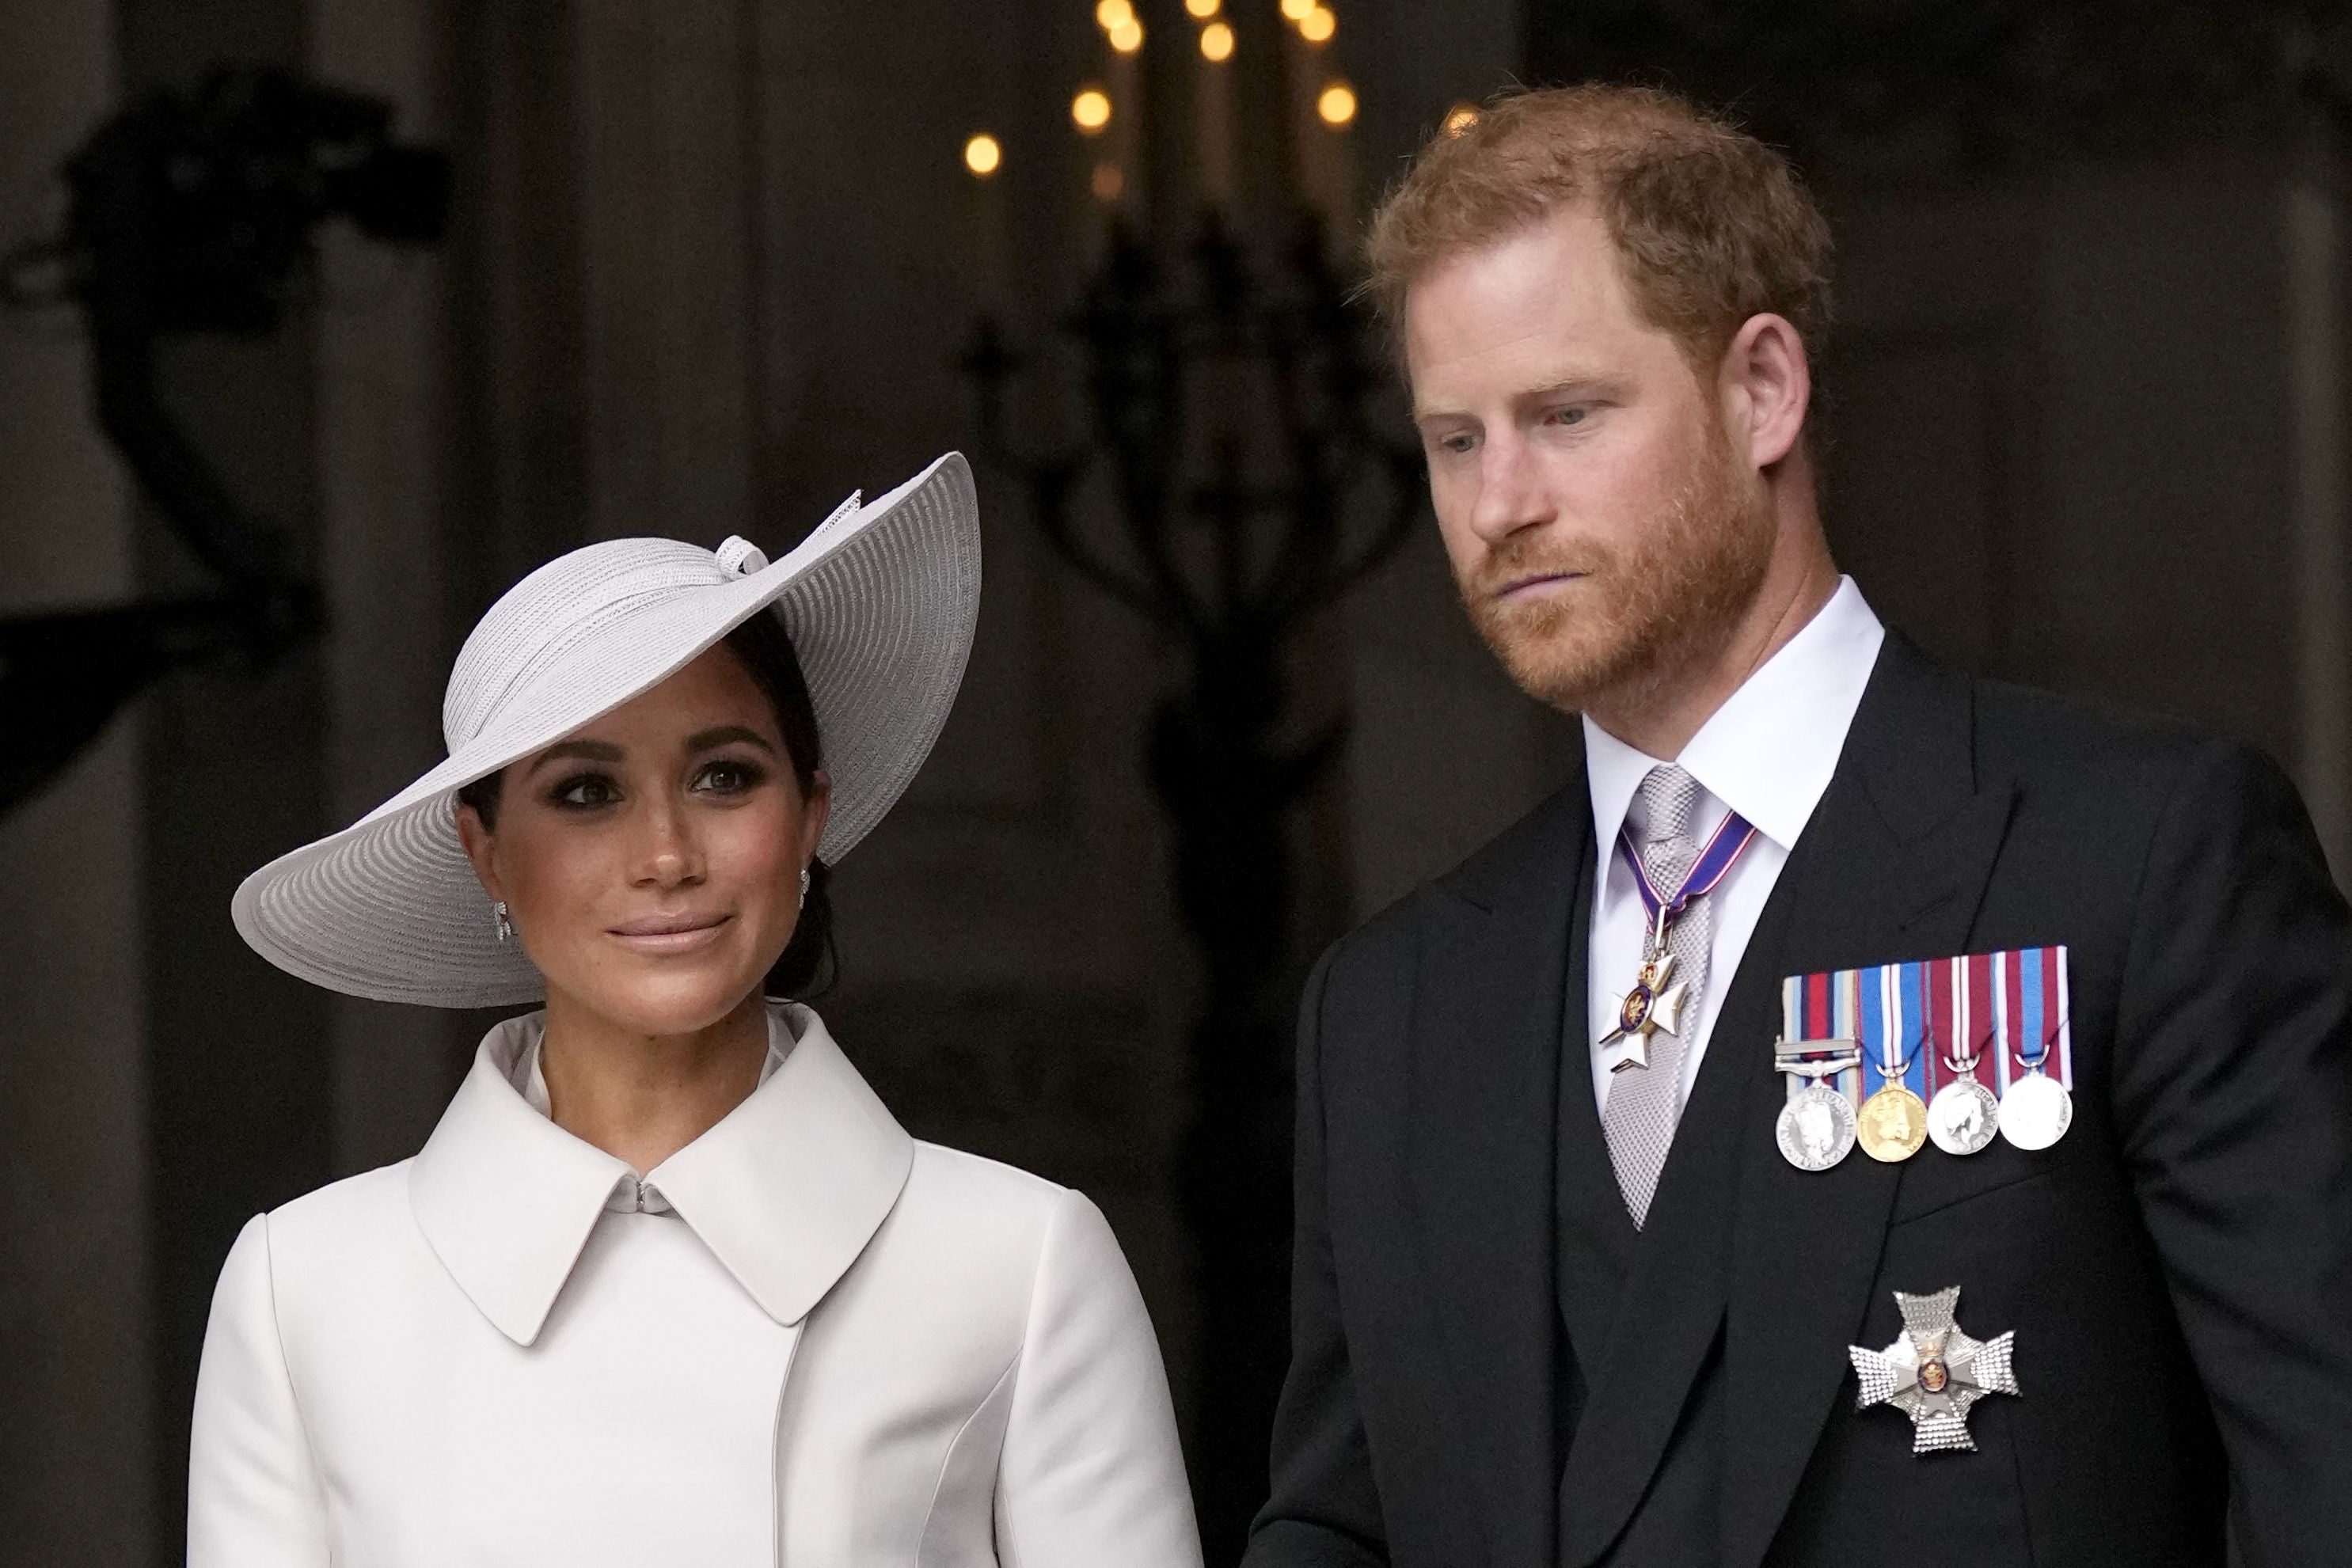 Harry’s wife Meghan has stayed behind in the US with their children